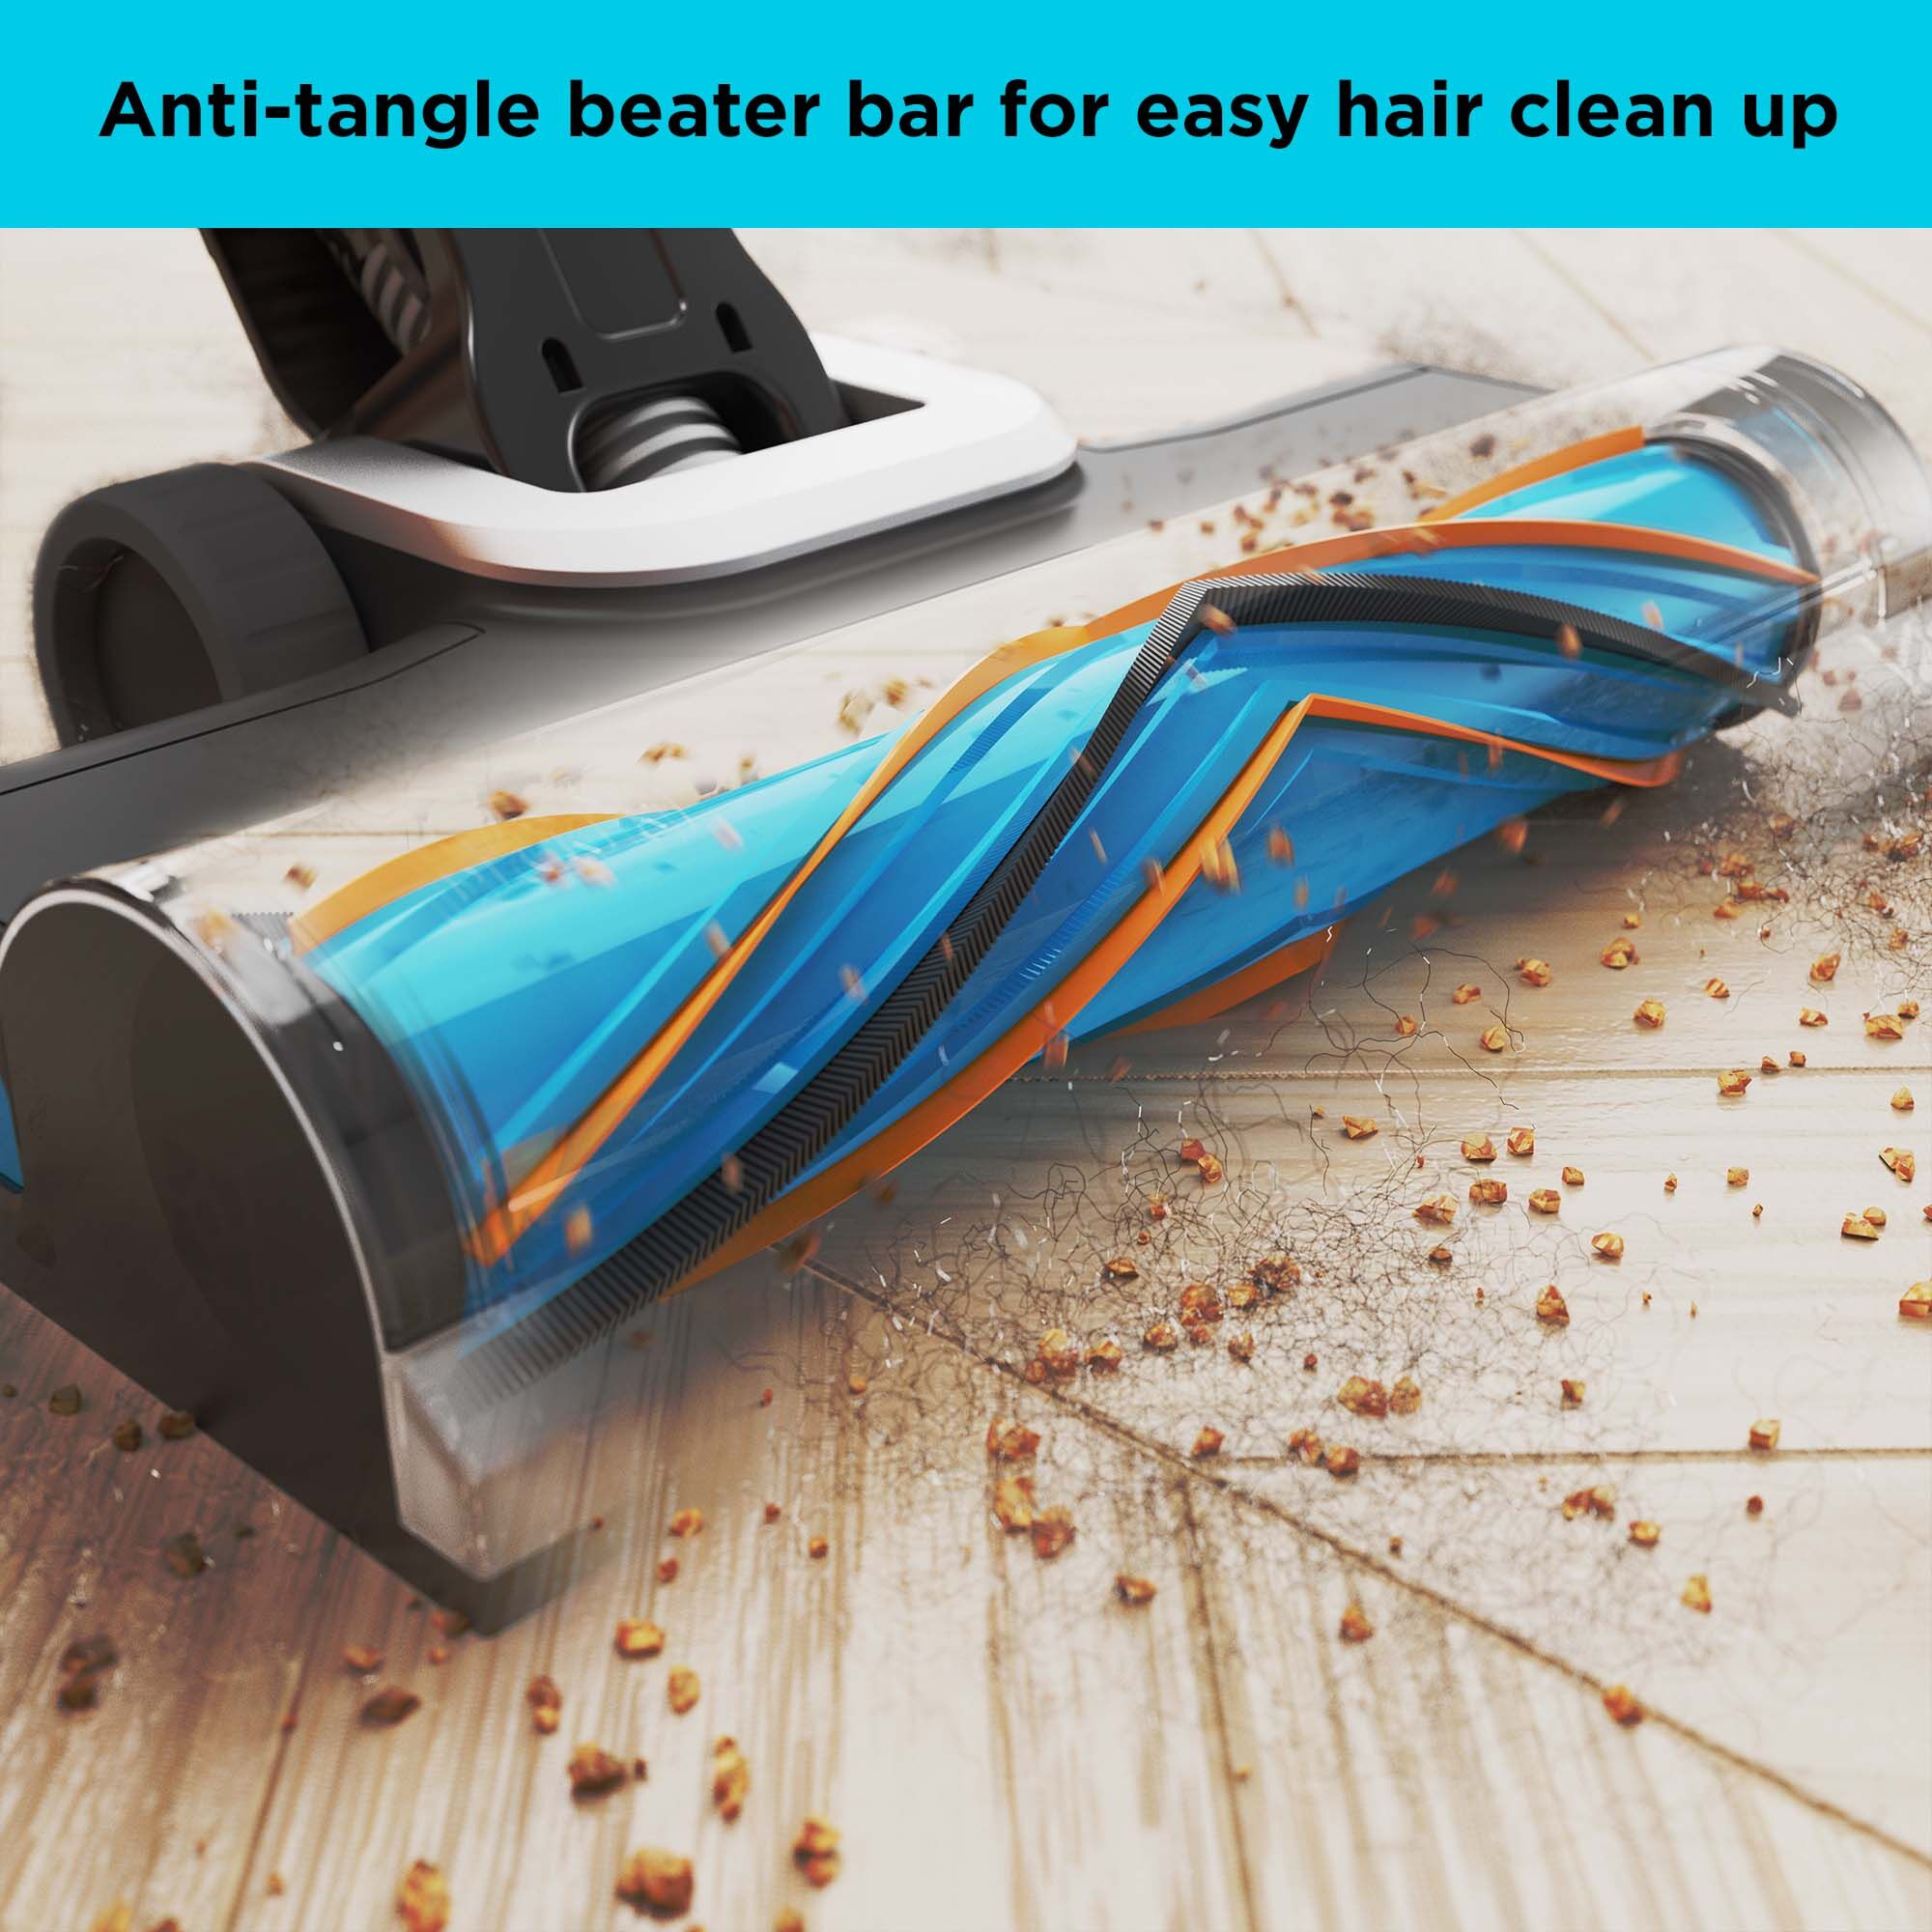 Anti-tangle beater bar on the POWERSERIES Extreme MAX stick vac